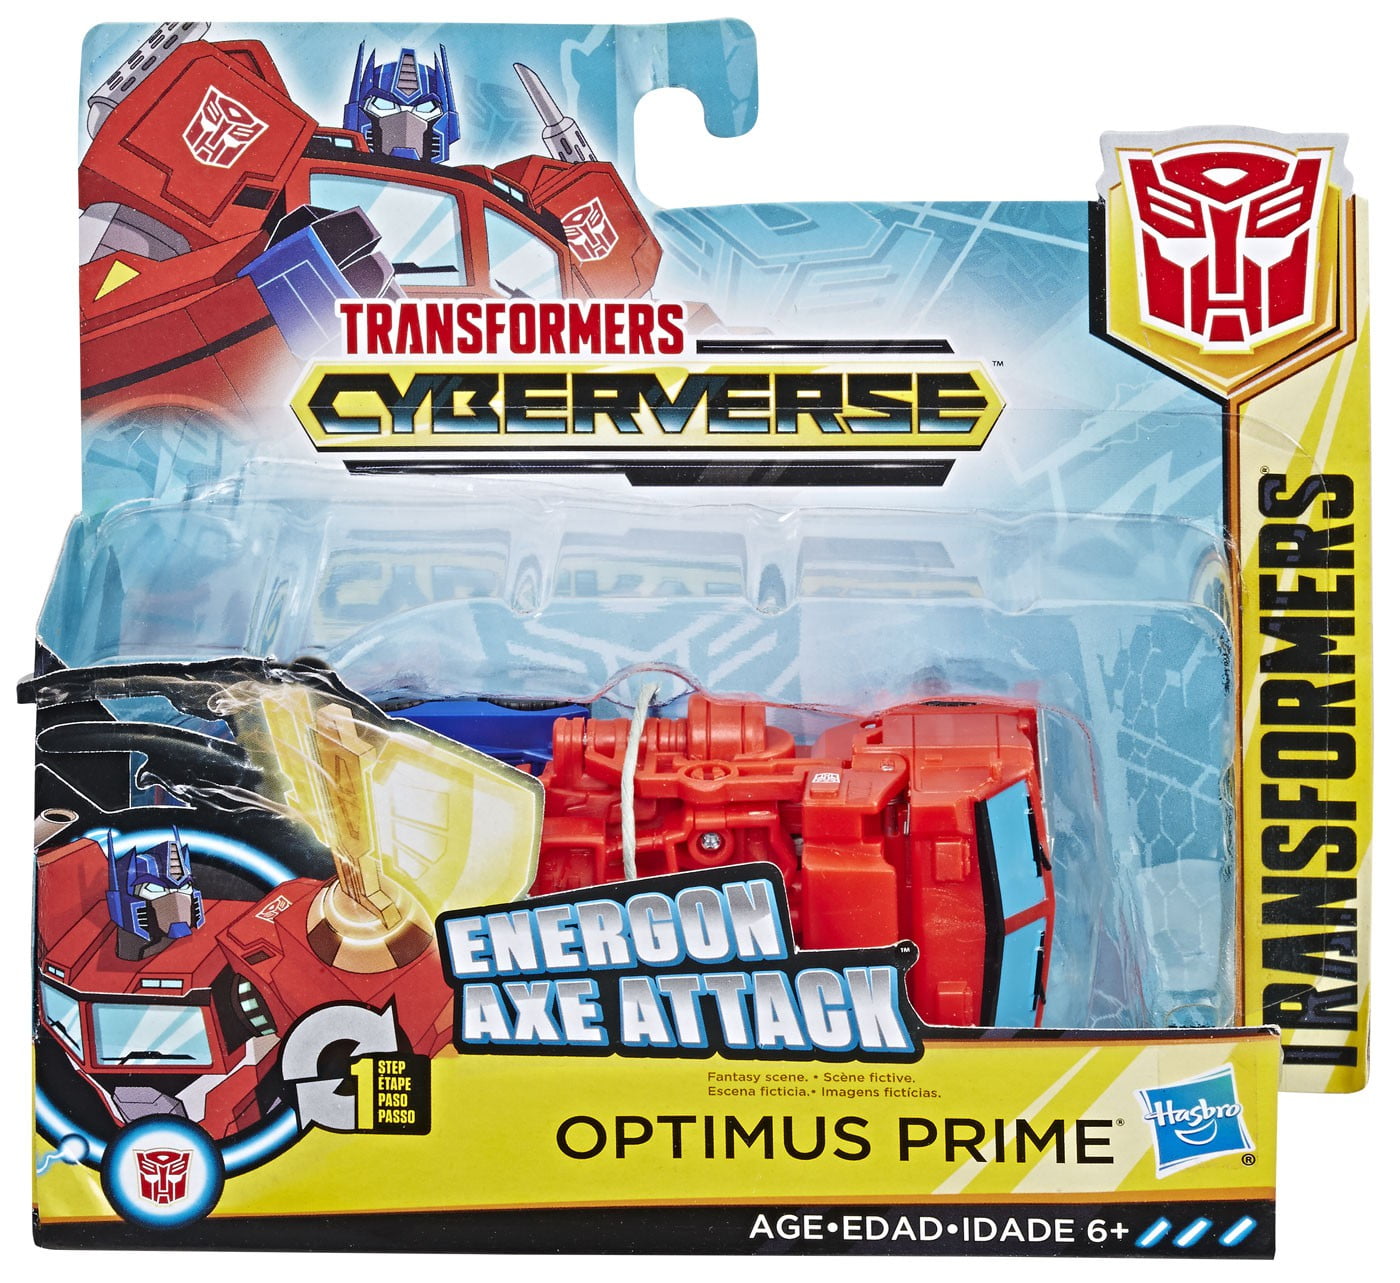 Hasbro Transformers Cyberverse 1 Step Changer Optimus Prime for sale online